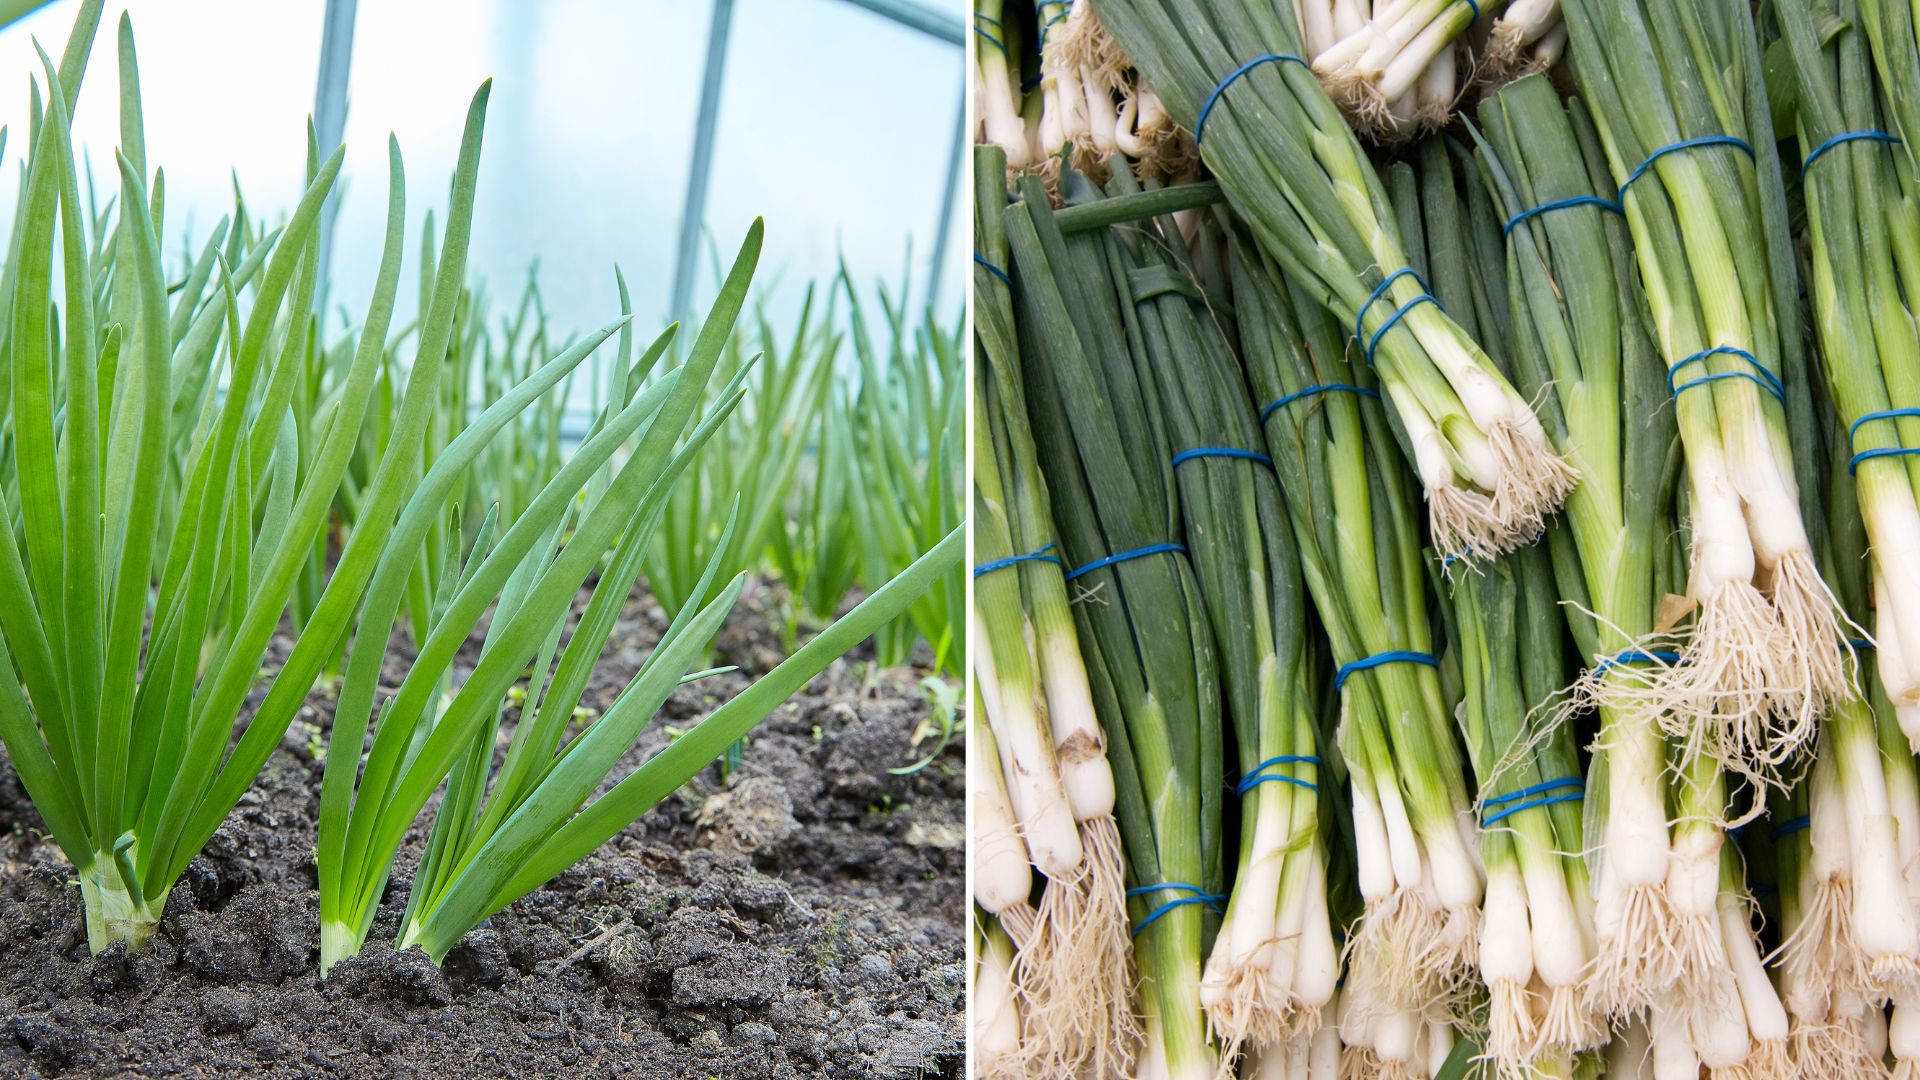 How To Store And Regrow Green Onions Properly